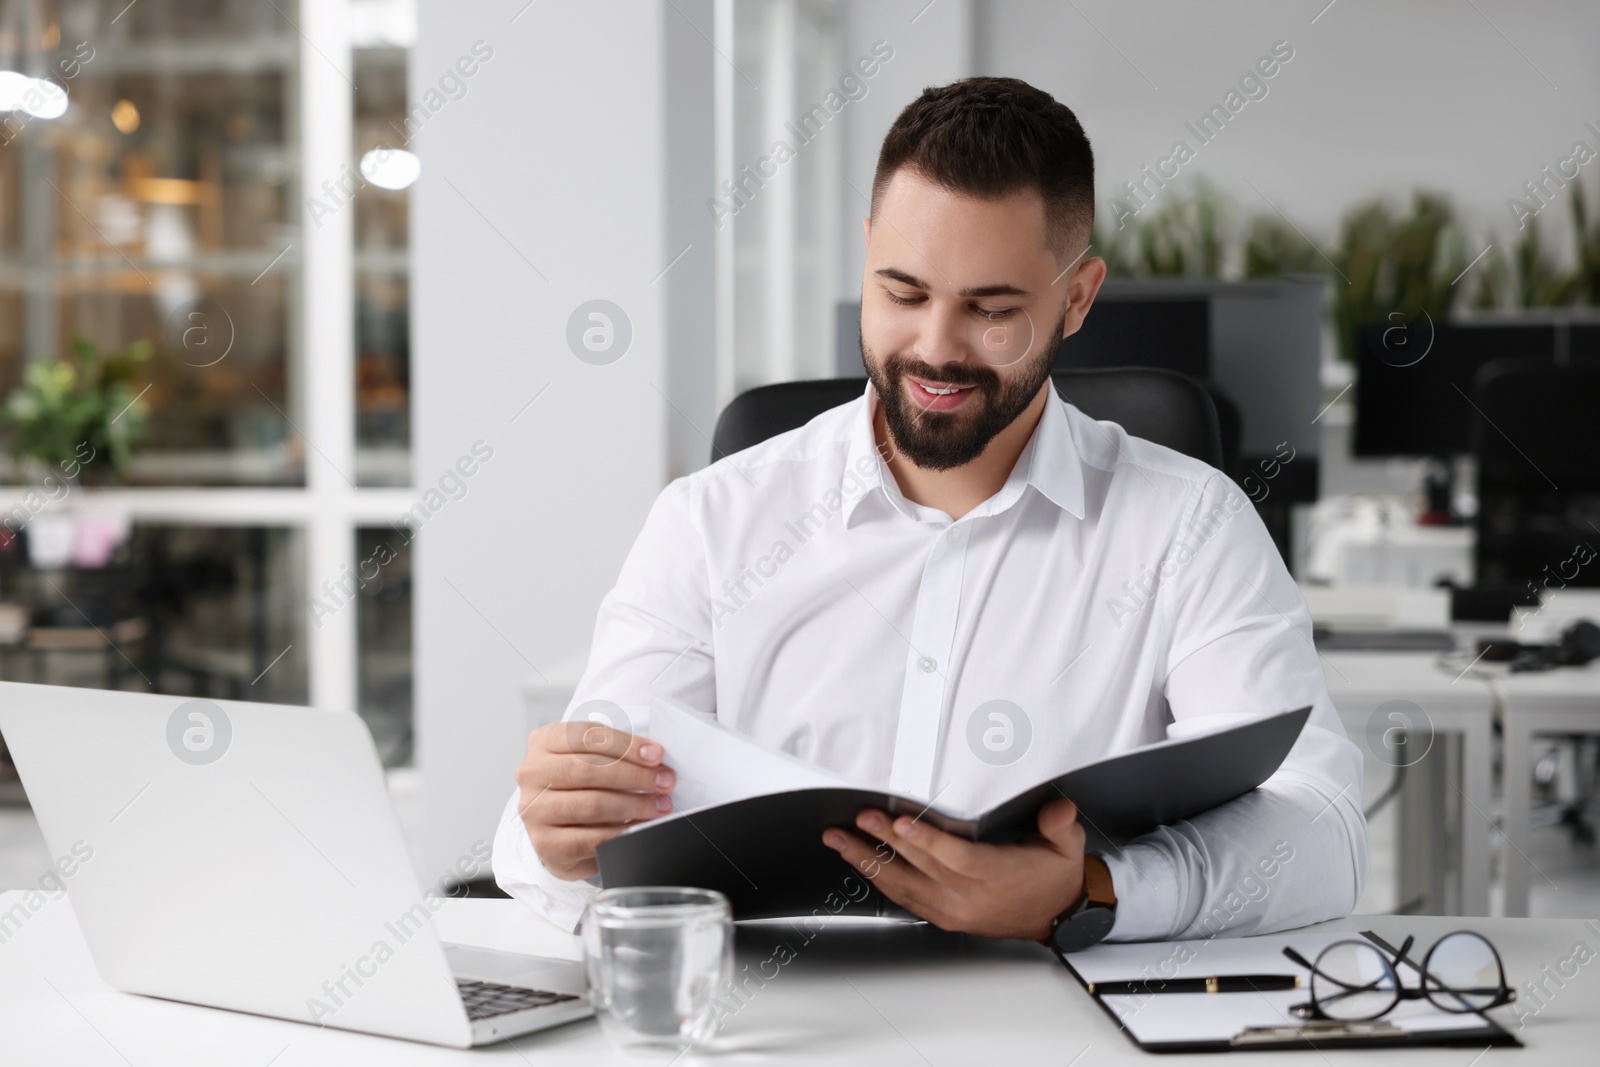 Photo of Smiling man working at table in office. Lawyer, businessman, accountant or manager